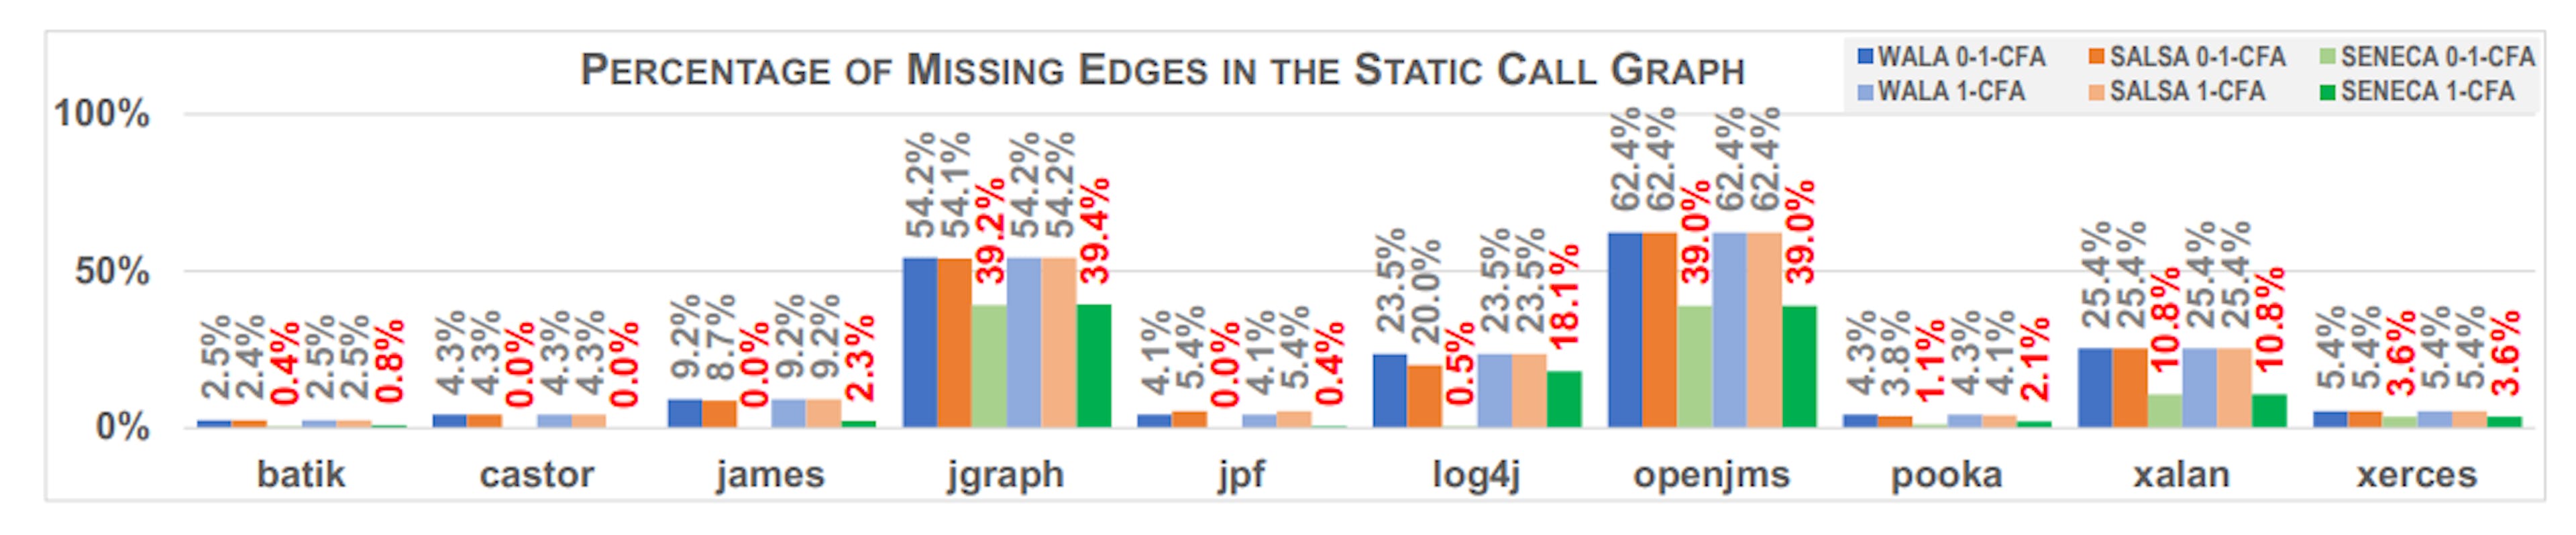 Fig. 7. Percentage of missing edges in the static call graphs computed by WALA, Salsa, and Seneca